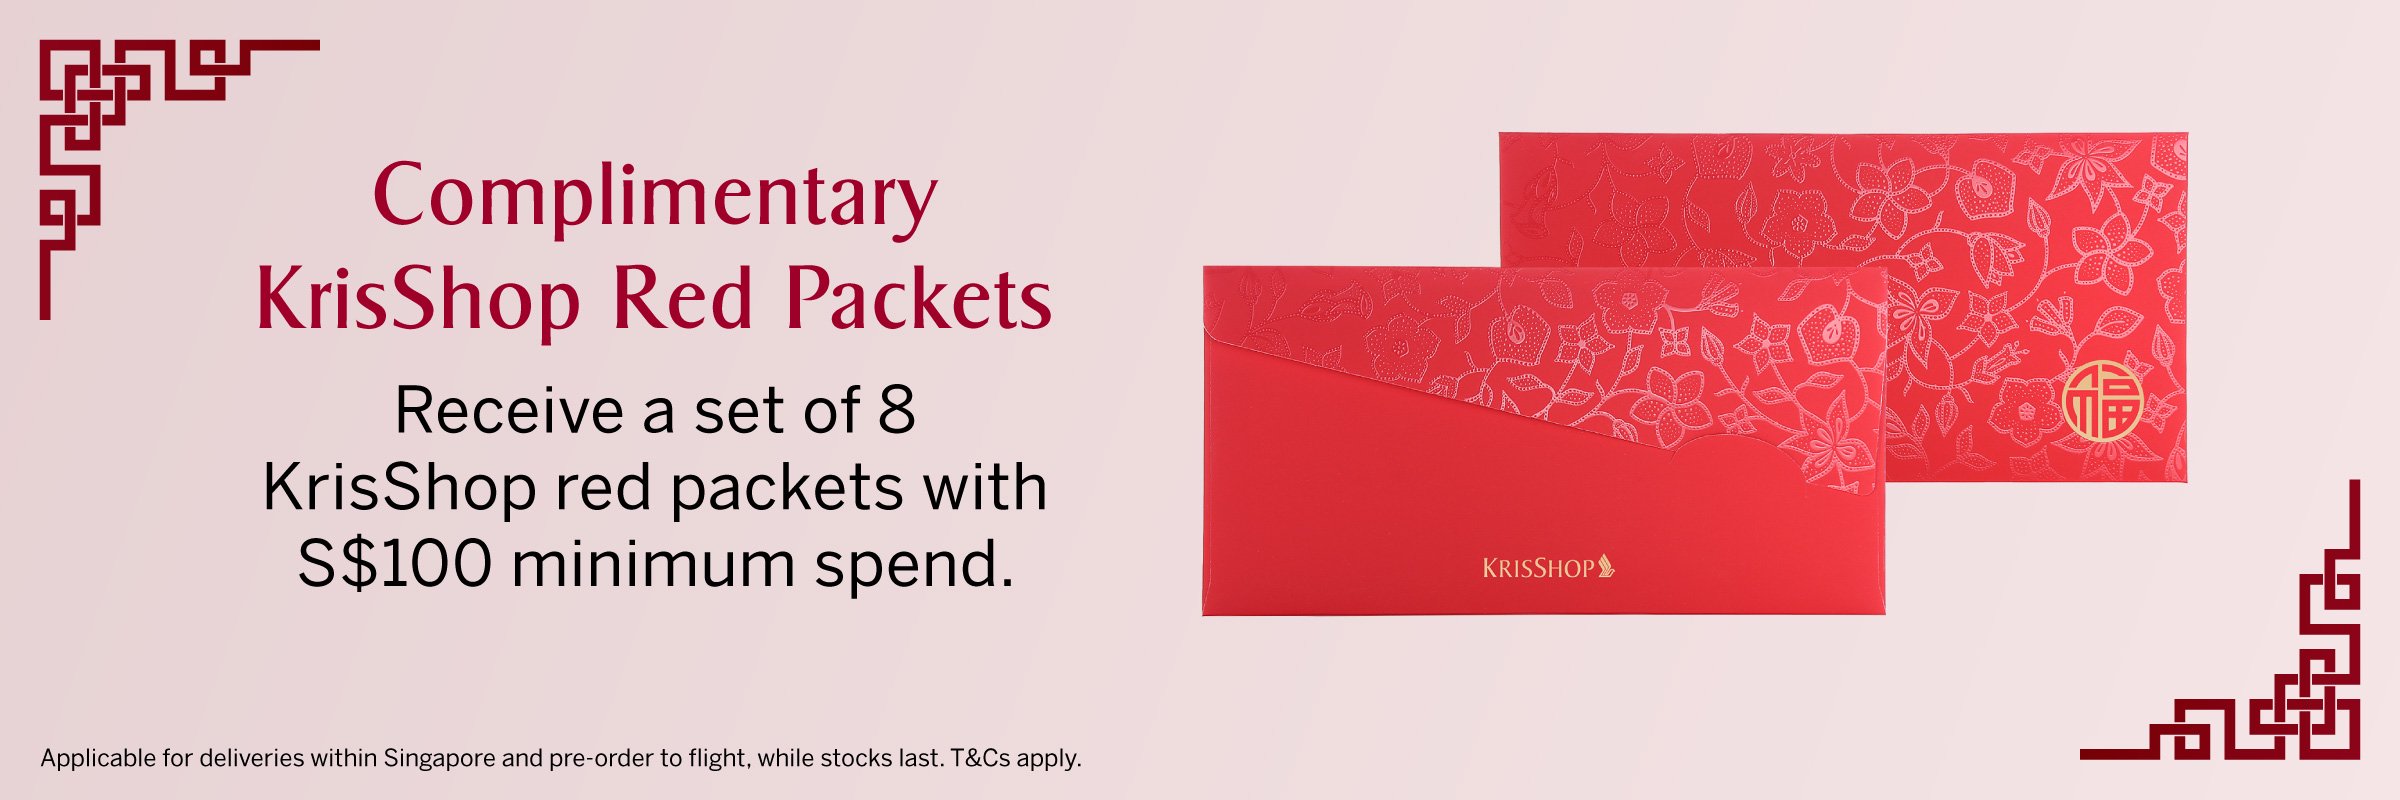 Complimentary KrisShop Red Packets - Receive a set of 8 red packets with S$100 min. spend